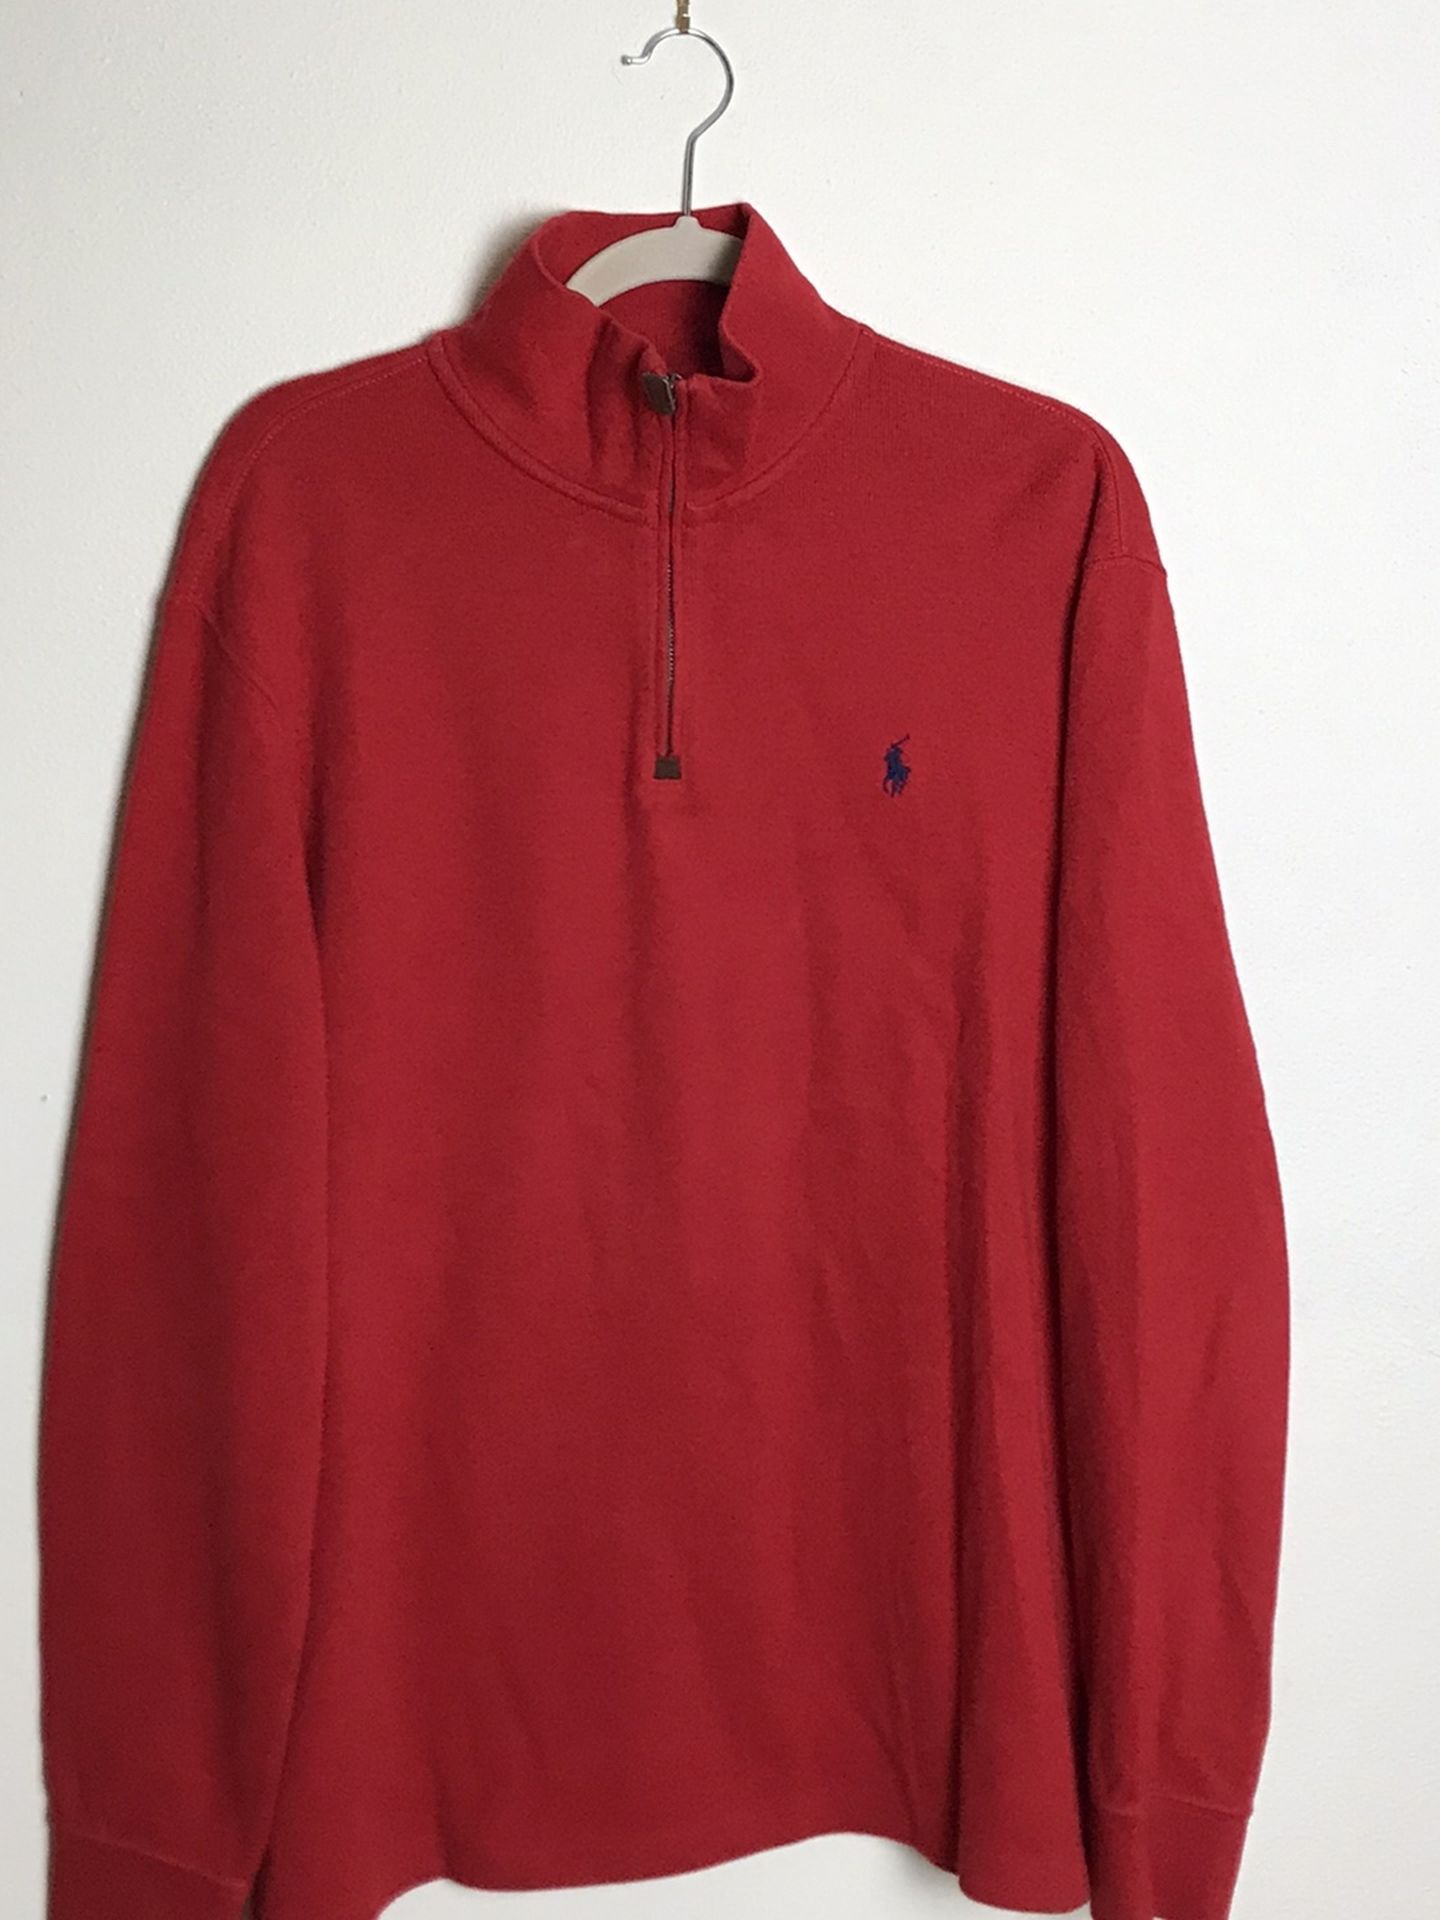 Polo Ralph Lauren Red Estate Rib 1/4 Zip Sweater Multi Color Pony Mens Large Gently used